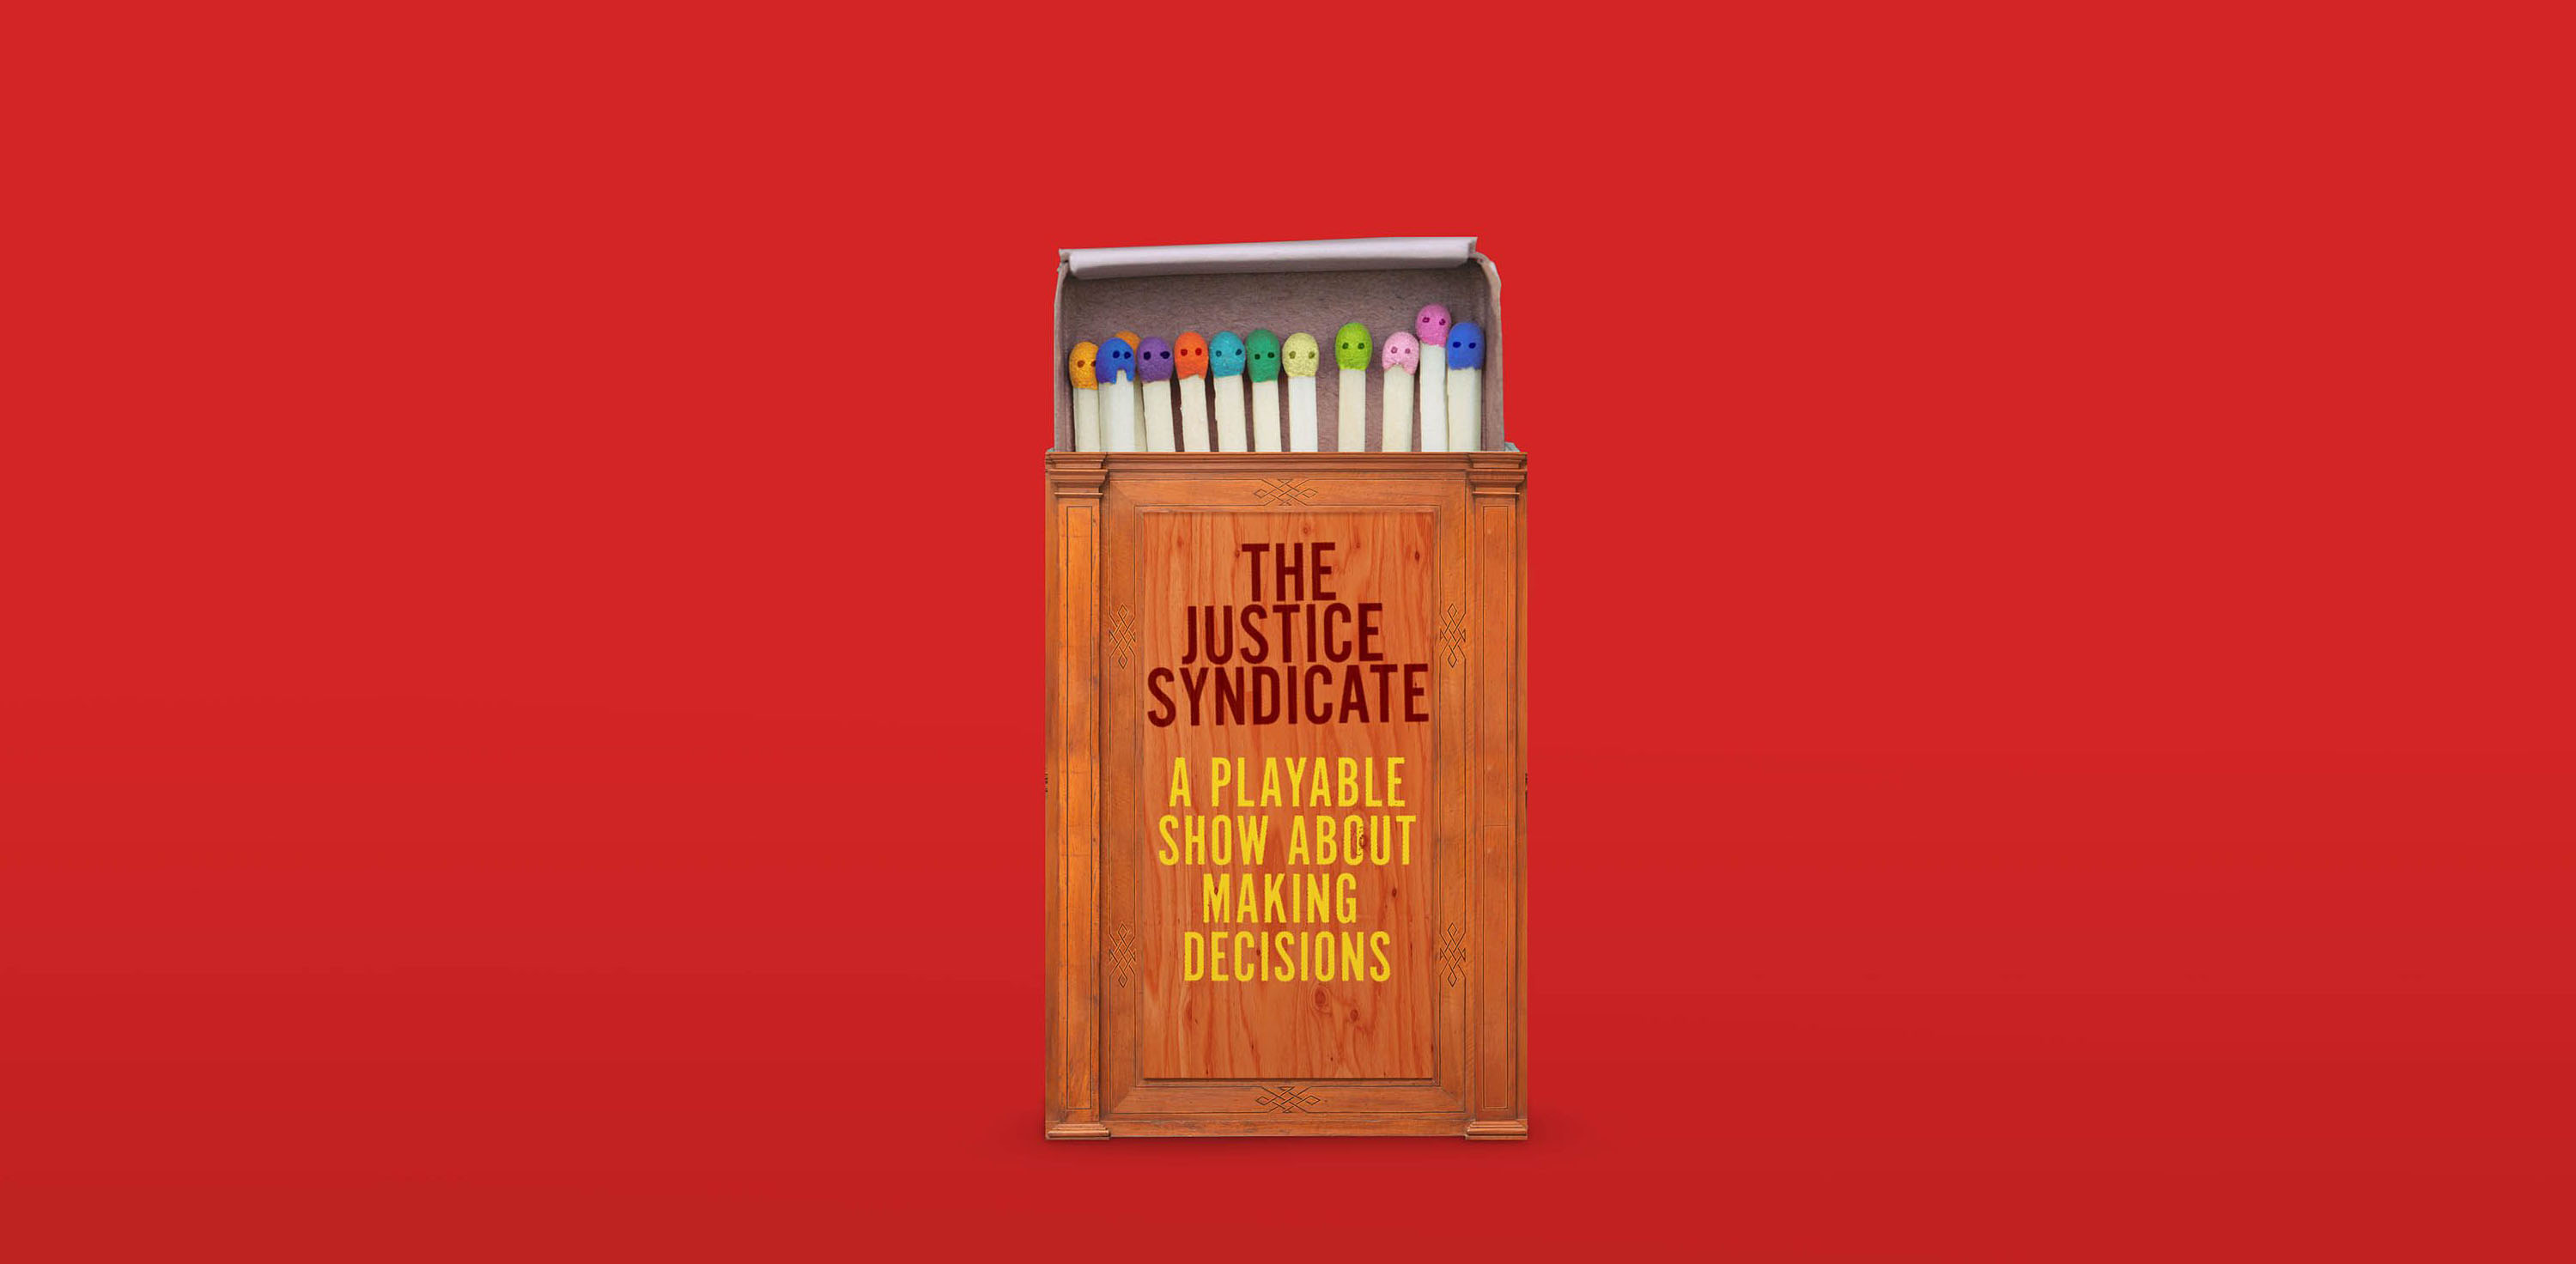 Promotional material for The Justice Syndicate, featuring a partially open matchbox on a red background with twelve matches visible. Each matchstick has eyes on